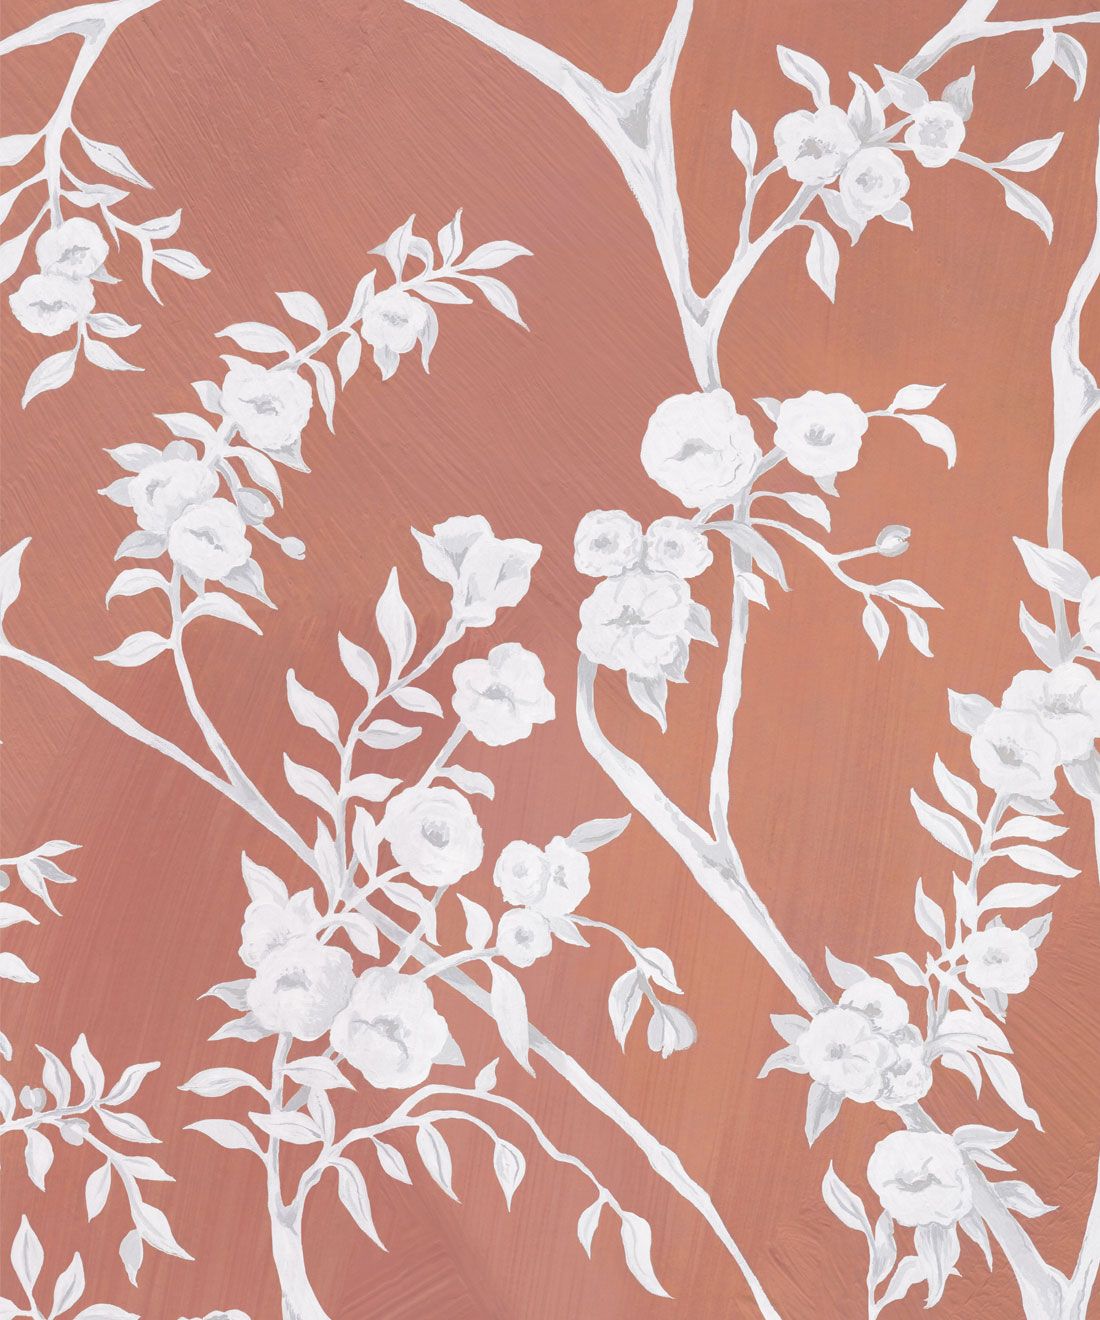 Blooming Joy • Chinoiserie Wallpaper by Danica Andler • Peach Swatch